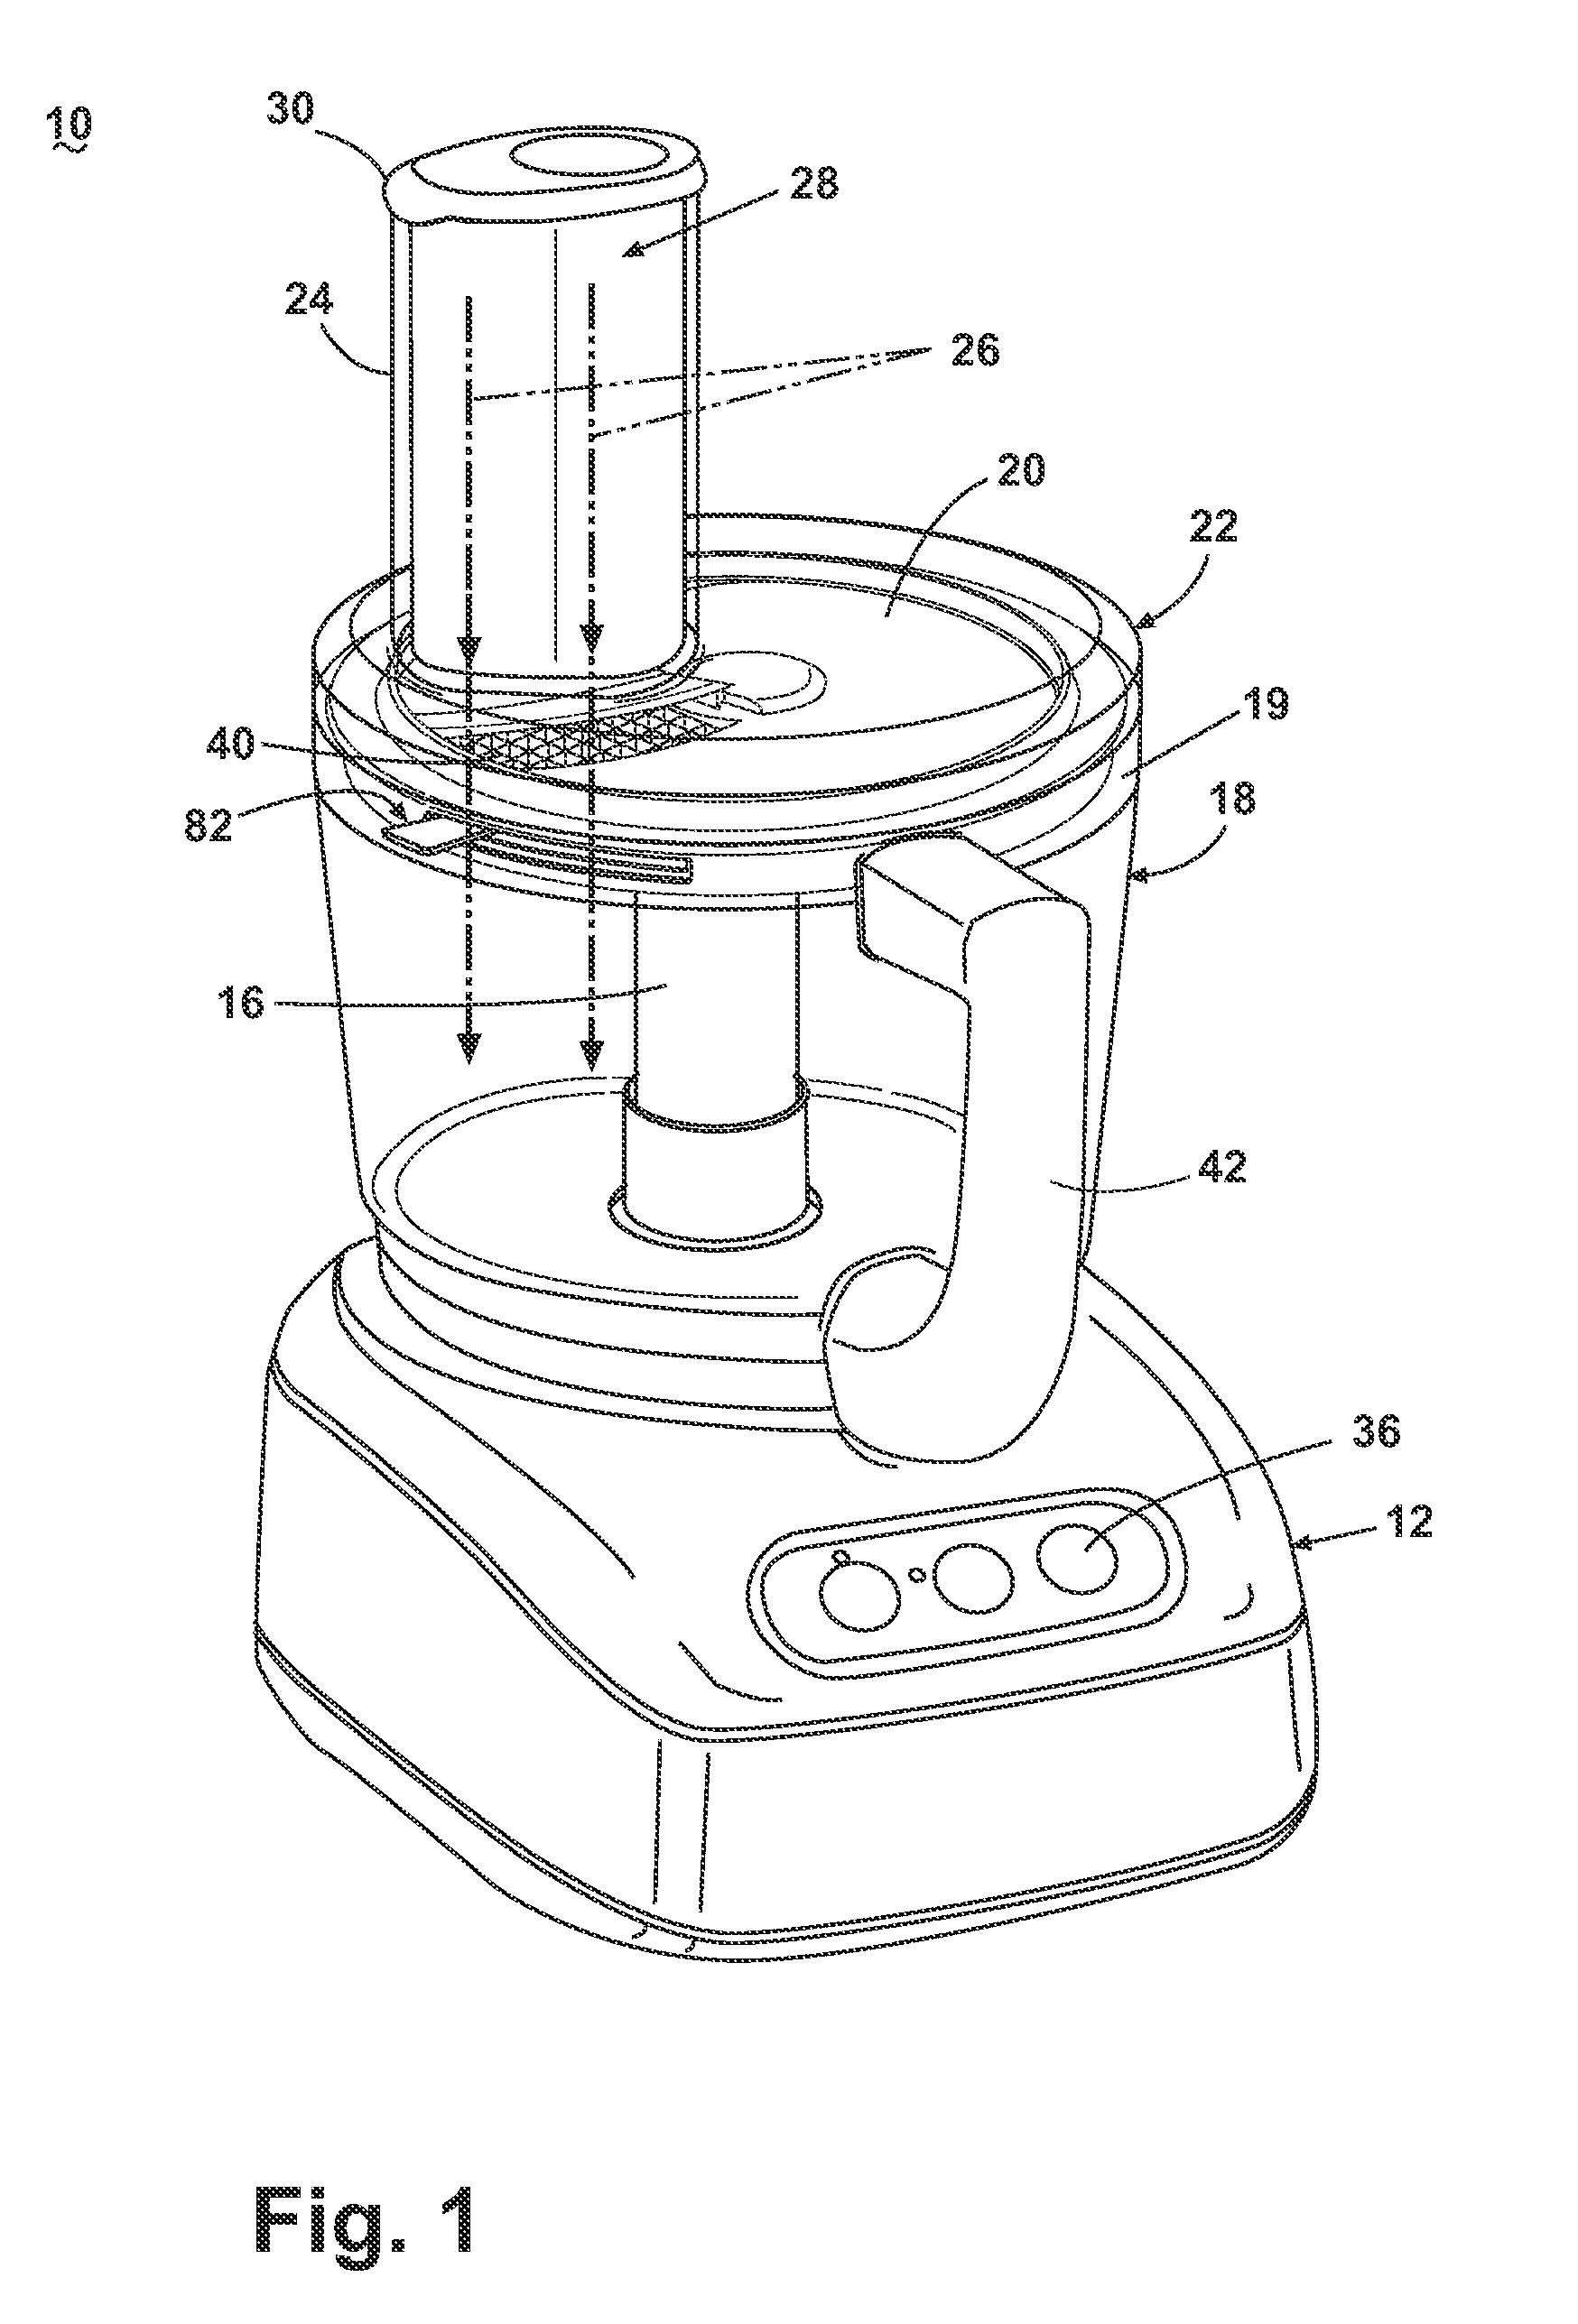 Food processor with dicing tool